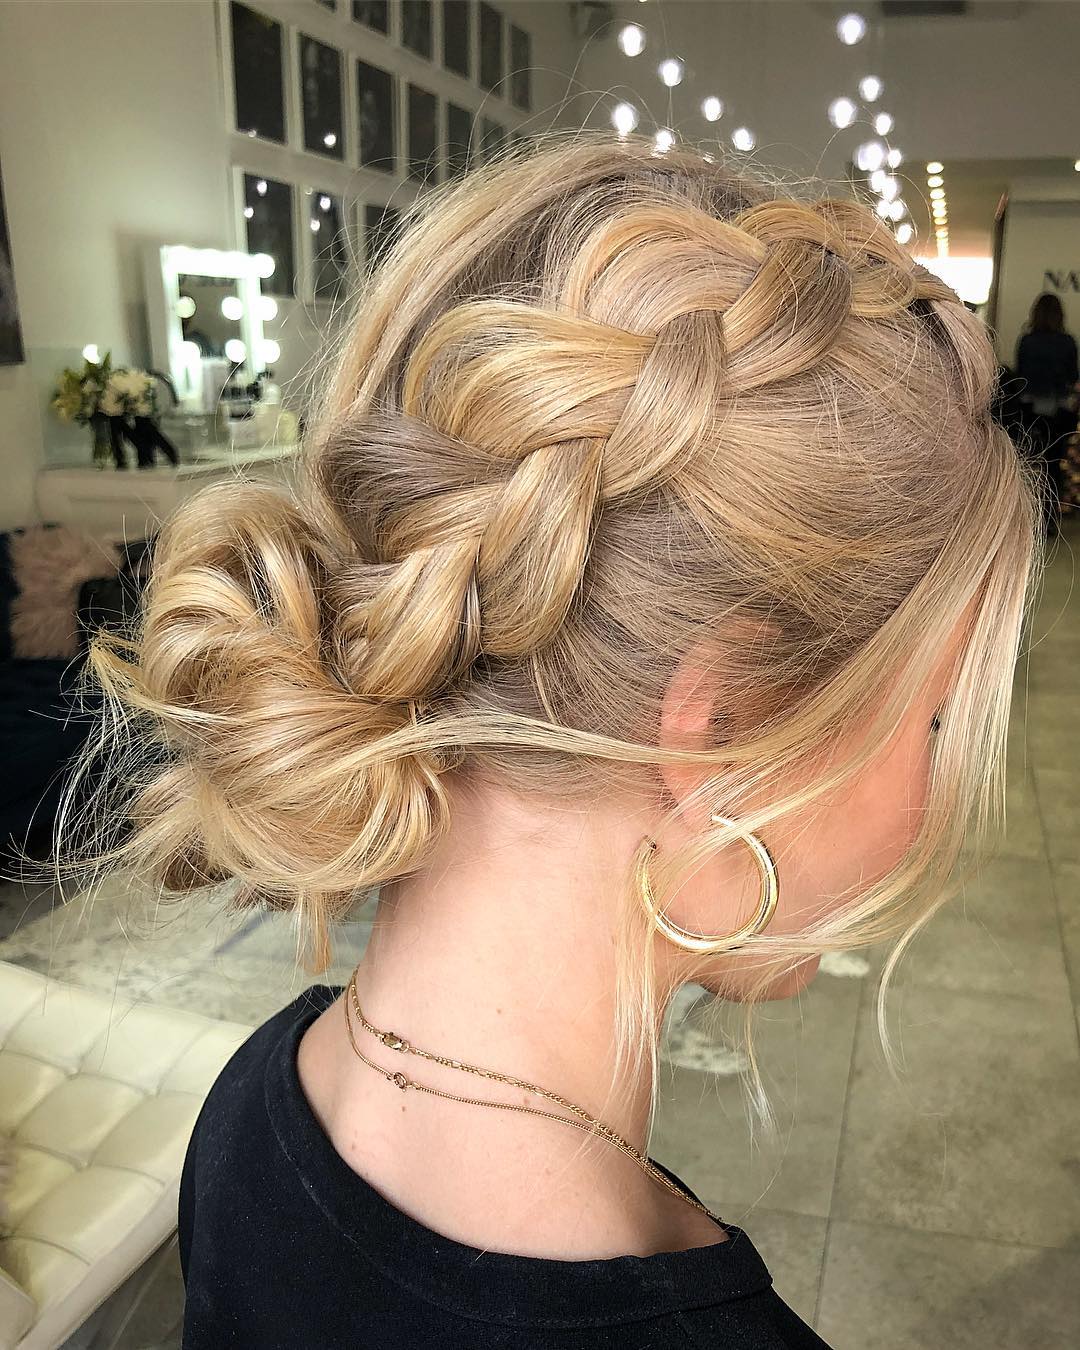 Chic Messy Bun Ideas To Inspire Your Next Updo - Beautiful Trends Today ...